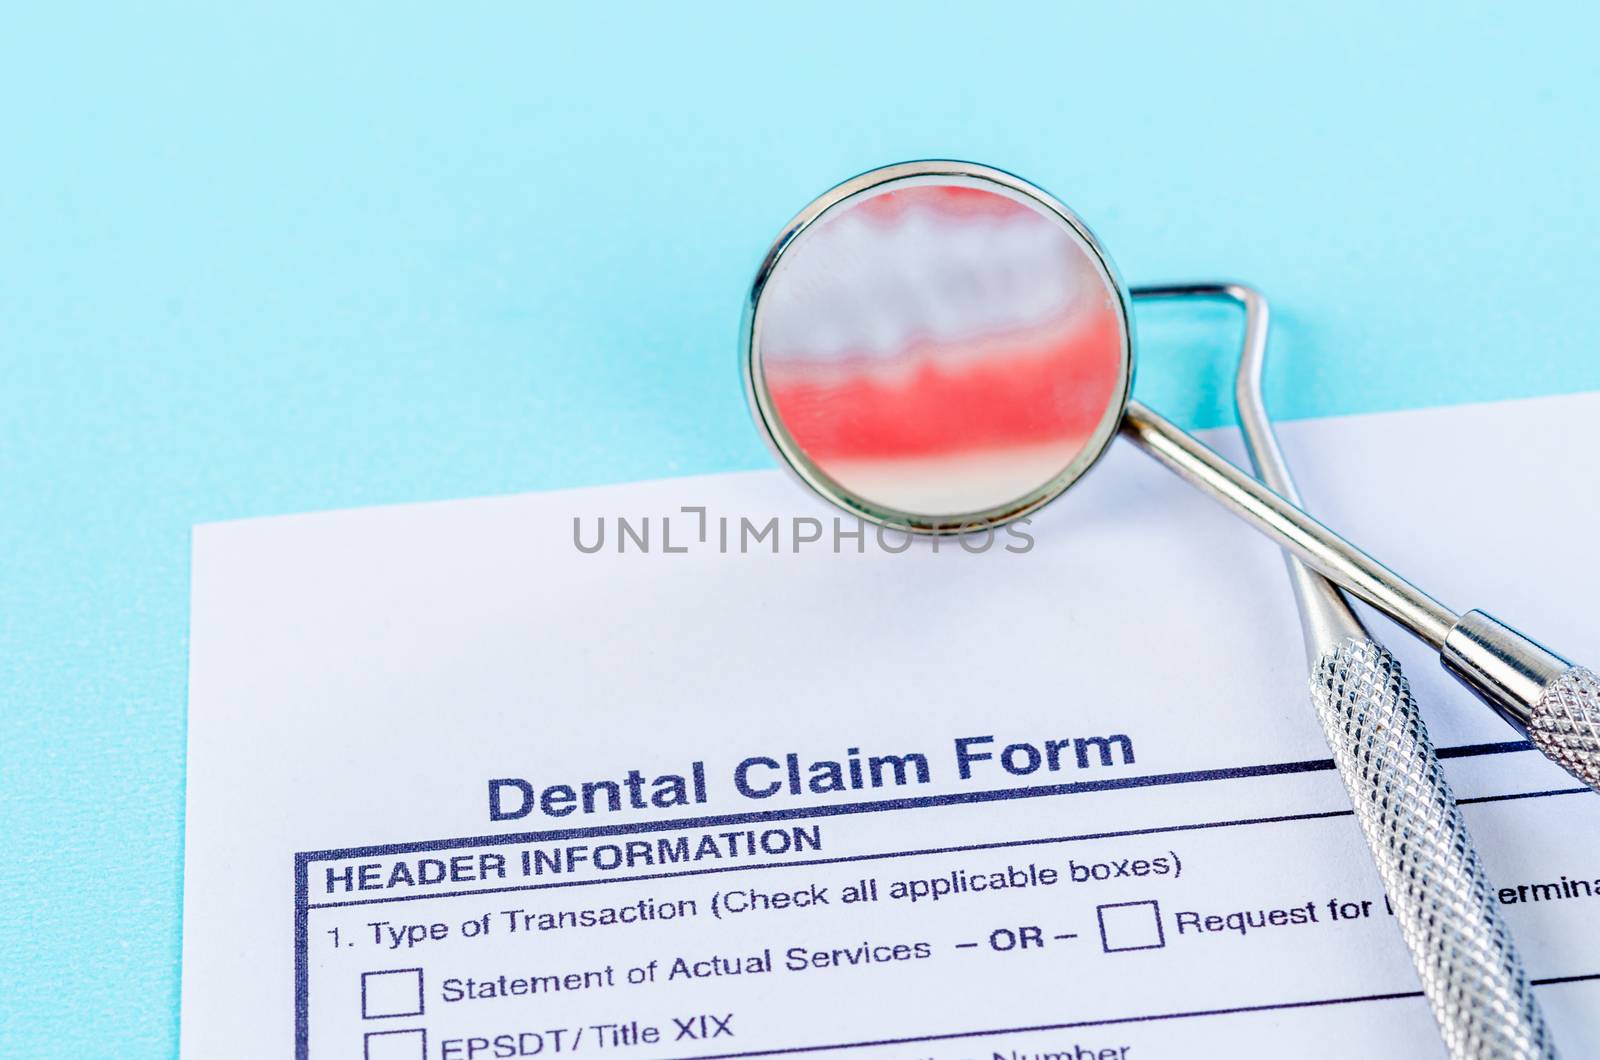 Dental claim Form with model tooth and dental instruments. Dental health and teeth care concept.